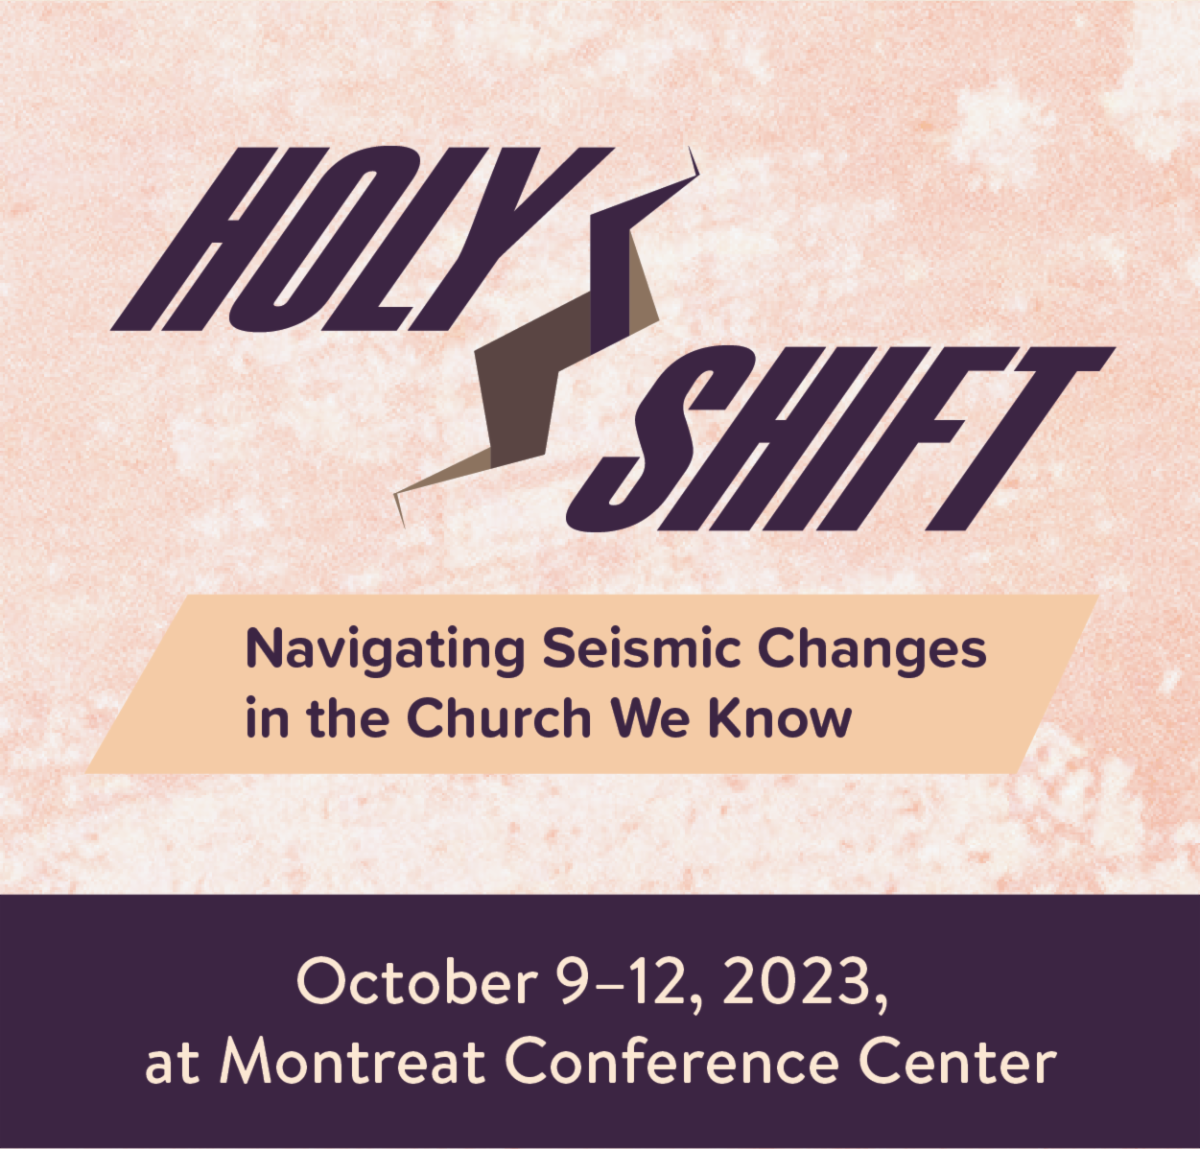 Holy Shift: Navigating Seismic Changes in the Church We Know - October 9–12, 2023, at Montreat Conference Center